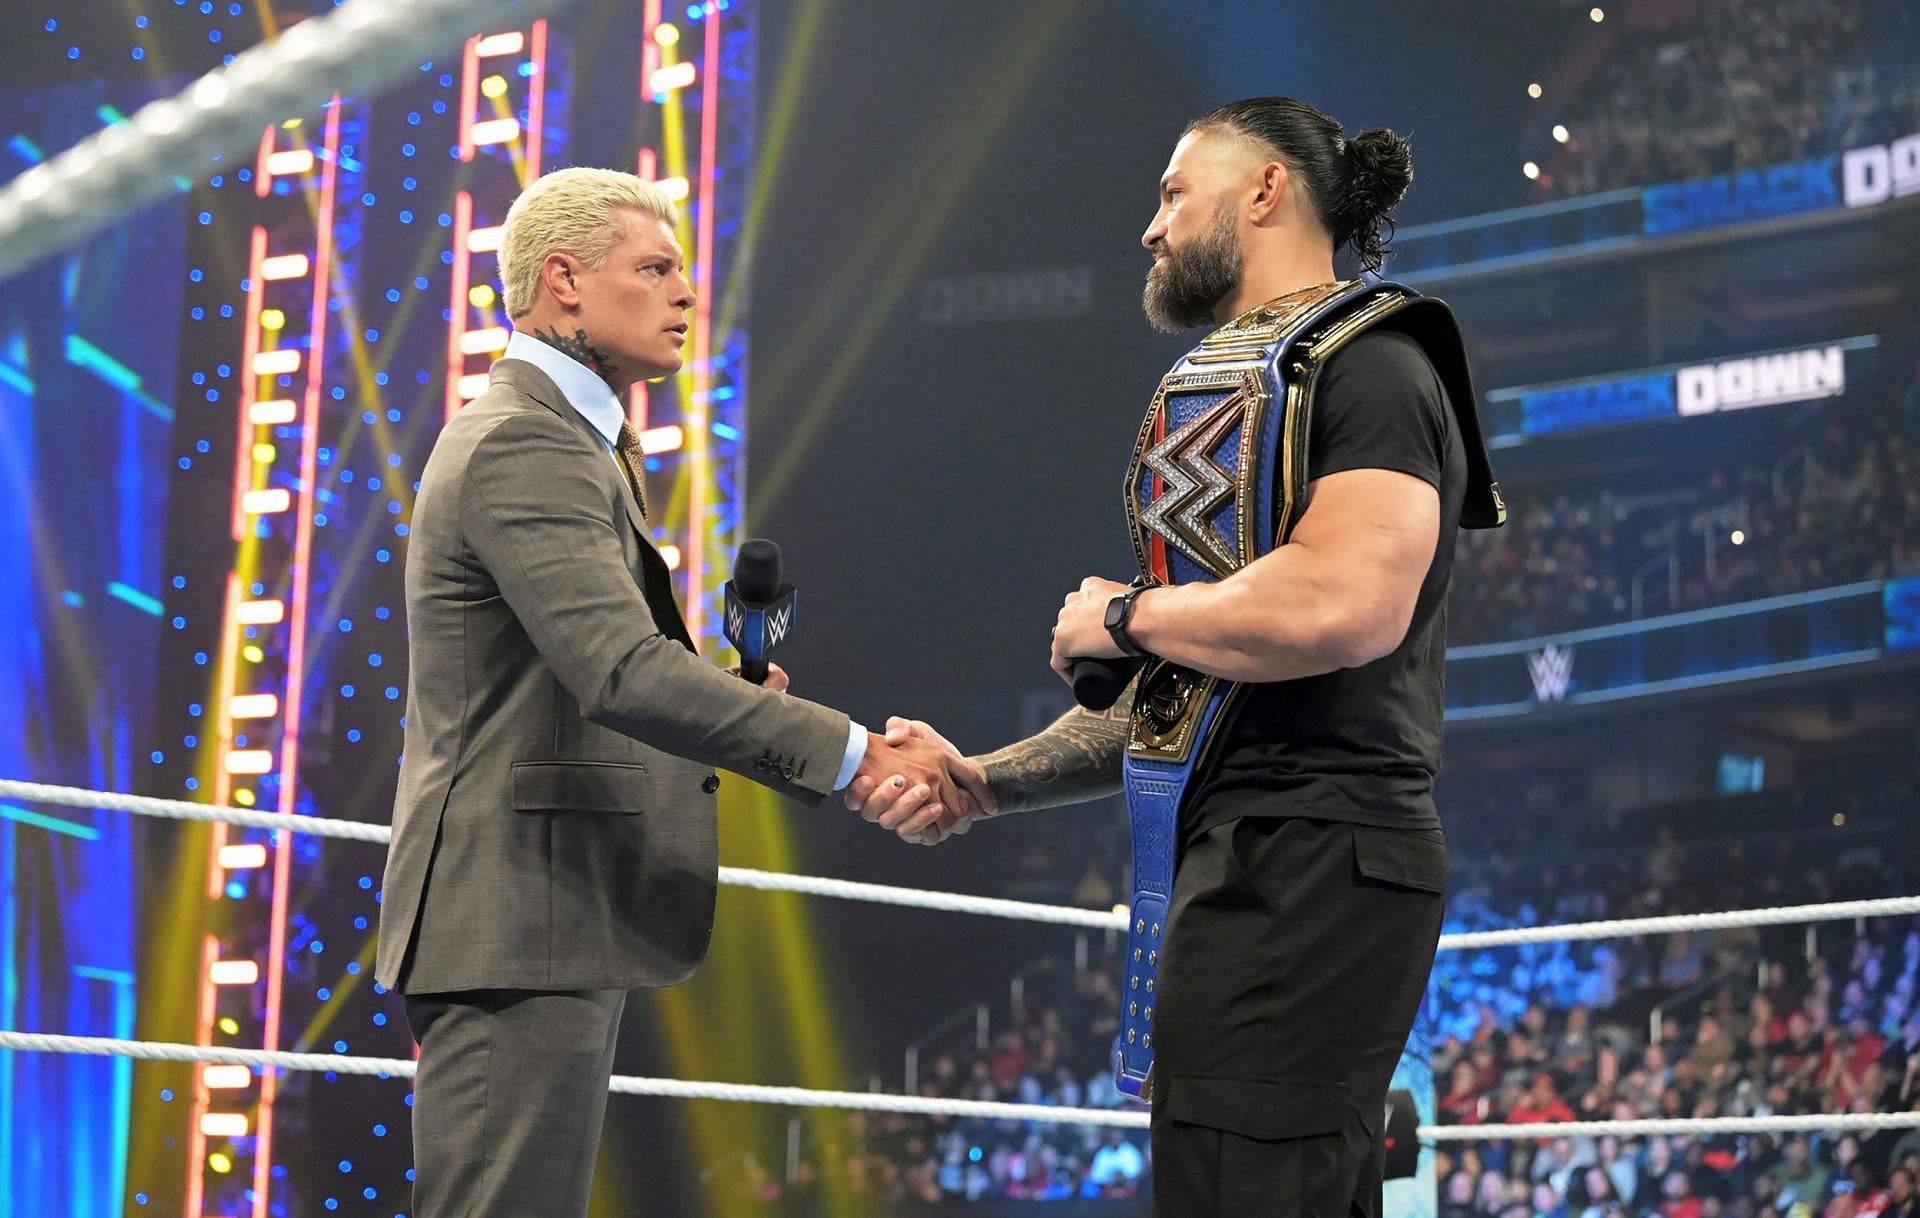 Handshakes will be out the window when Cody Rhodes faces Roman Reigns in Hollywood.